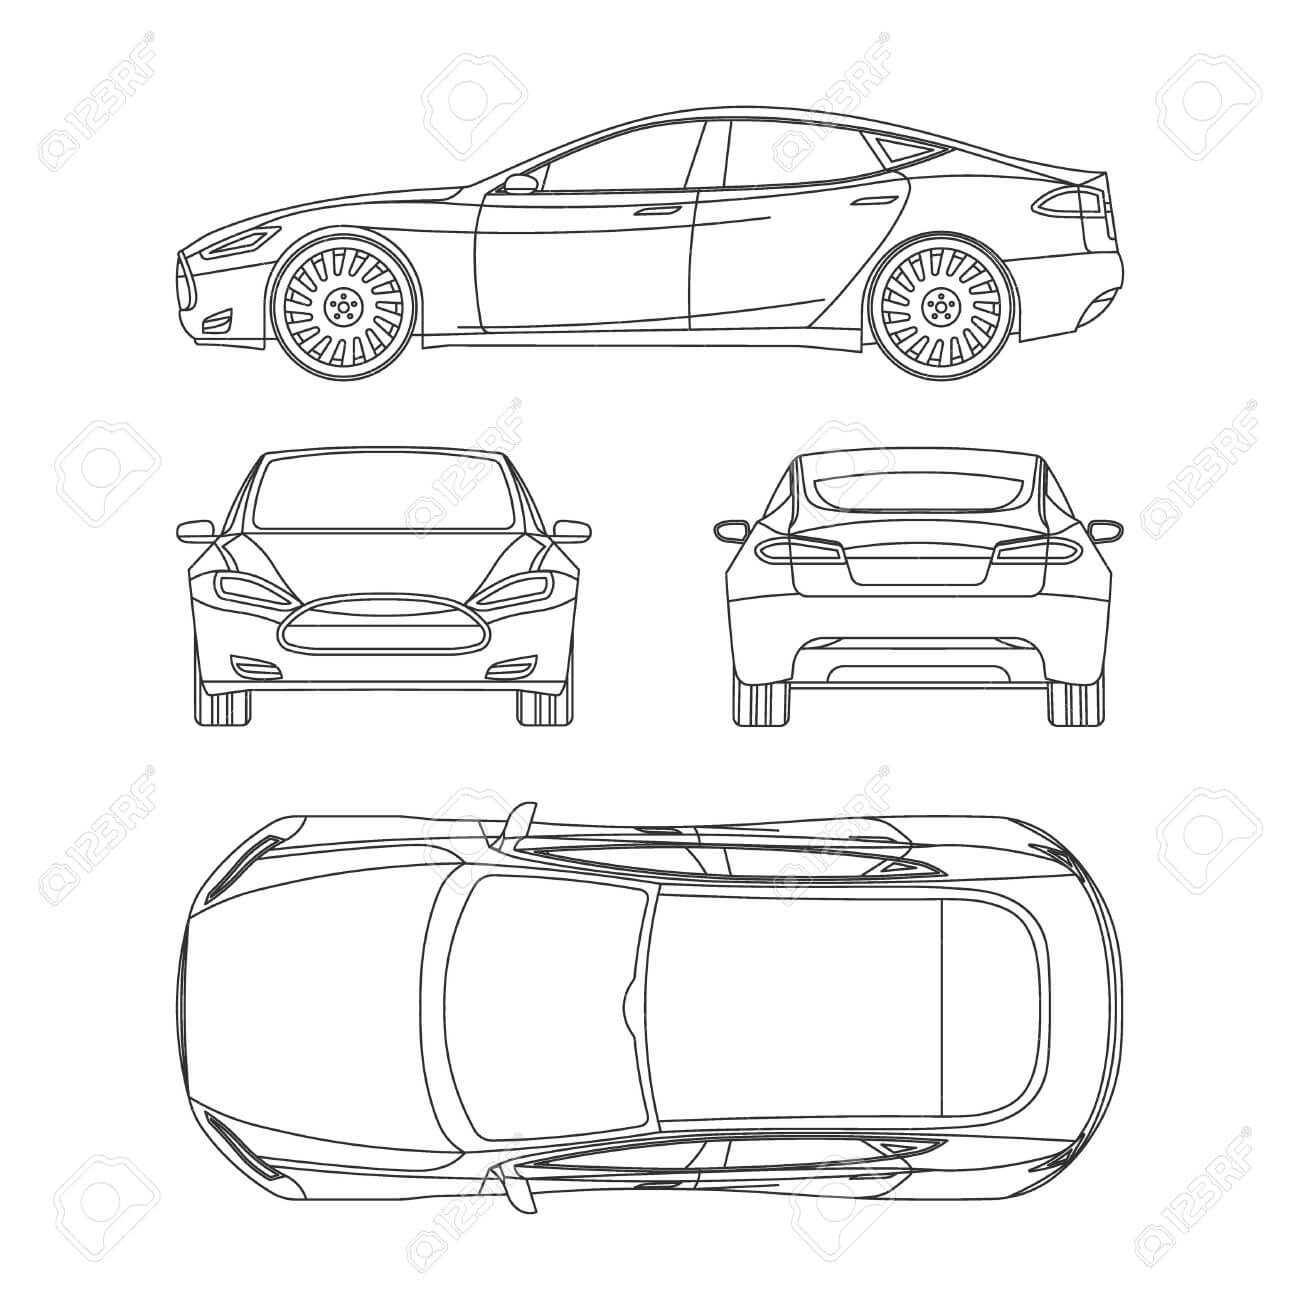 Car Line Draw Insurance, Rent Damage, Condition Report Form Blueprint Throughout Car Damage Report Template